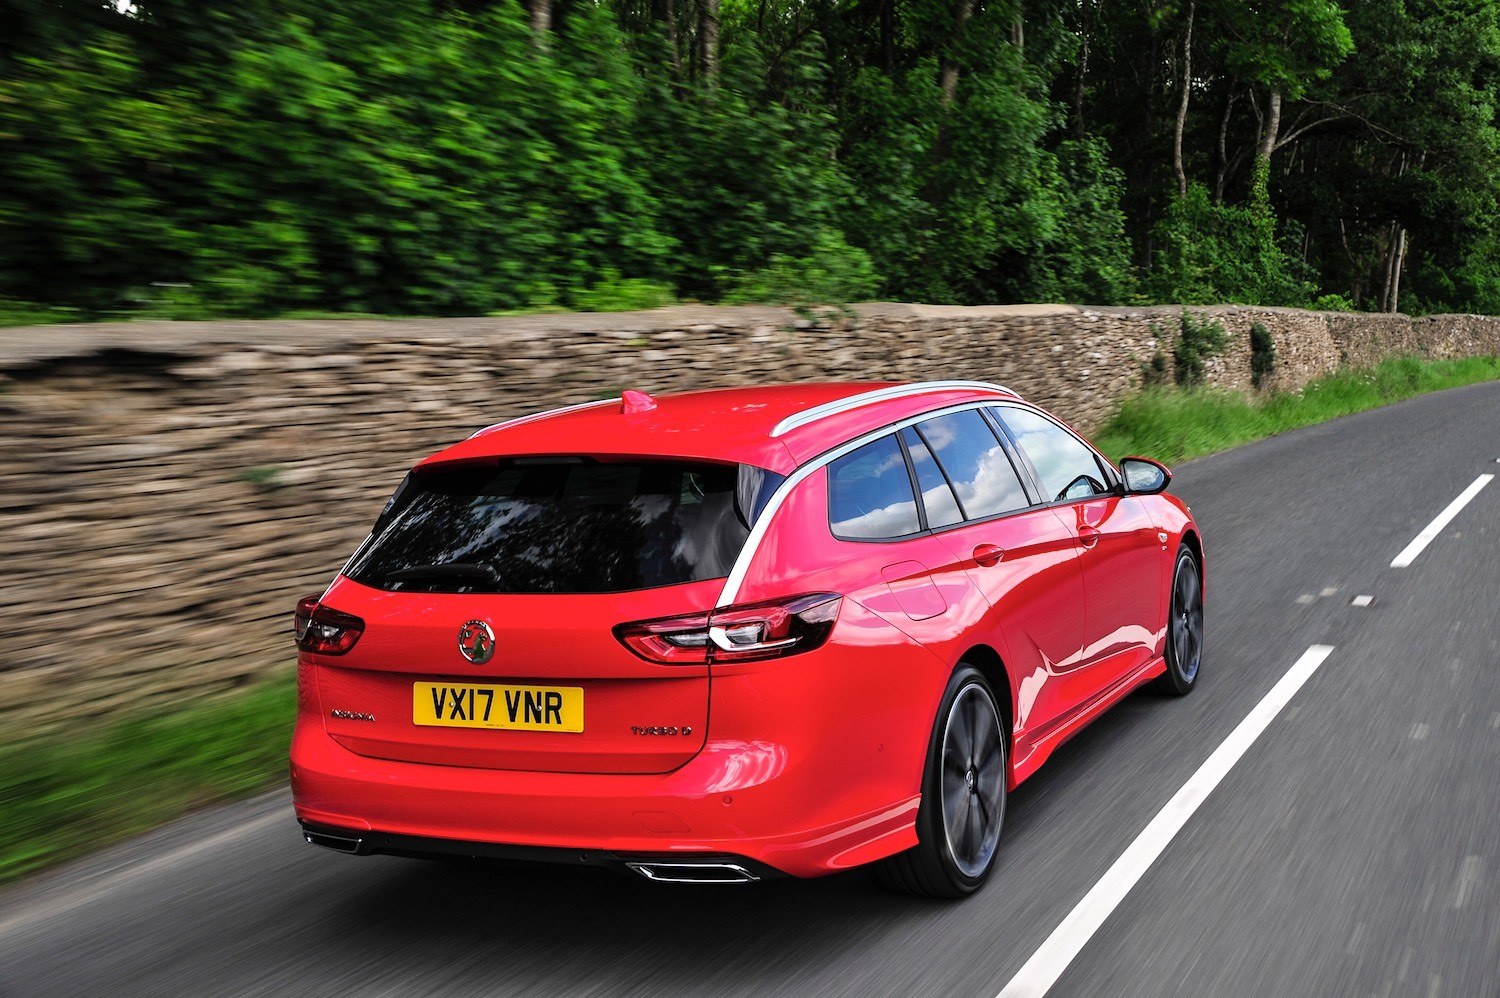 drive-Tom Scanlan Reviews the New Vauxhall Insignia Sports Tourer 3